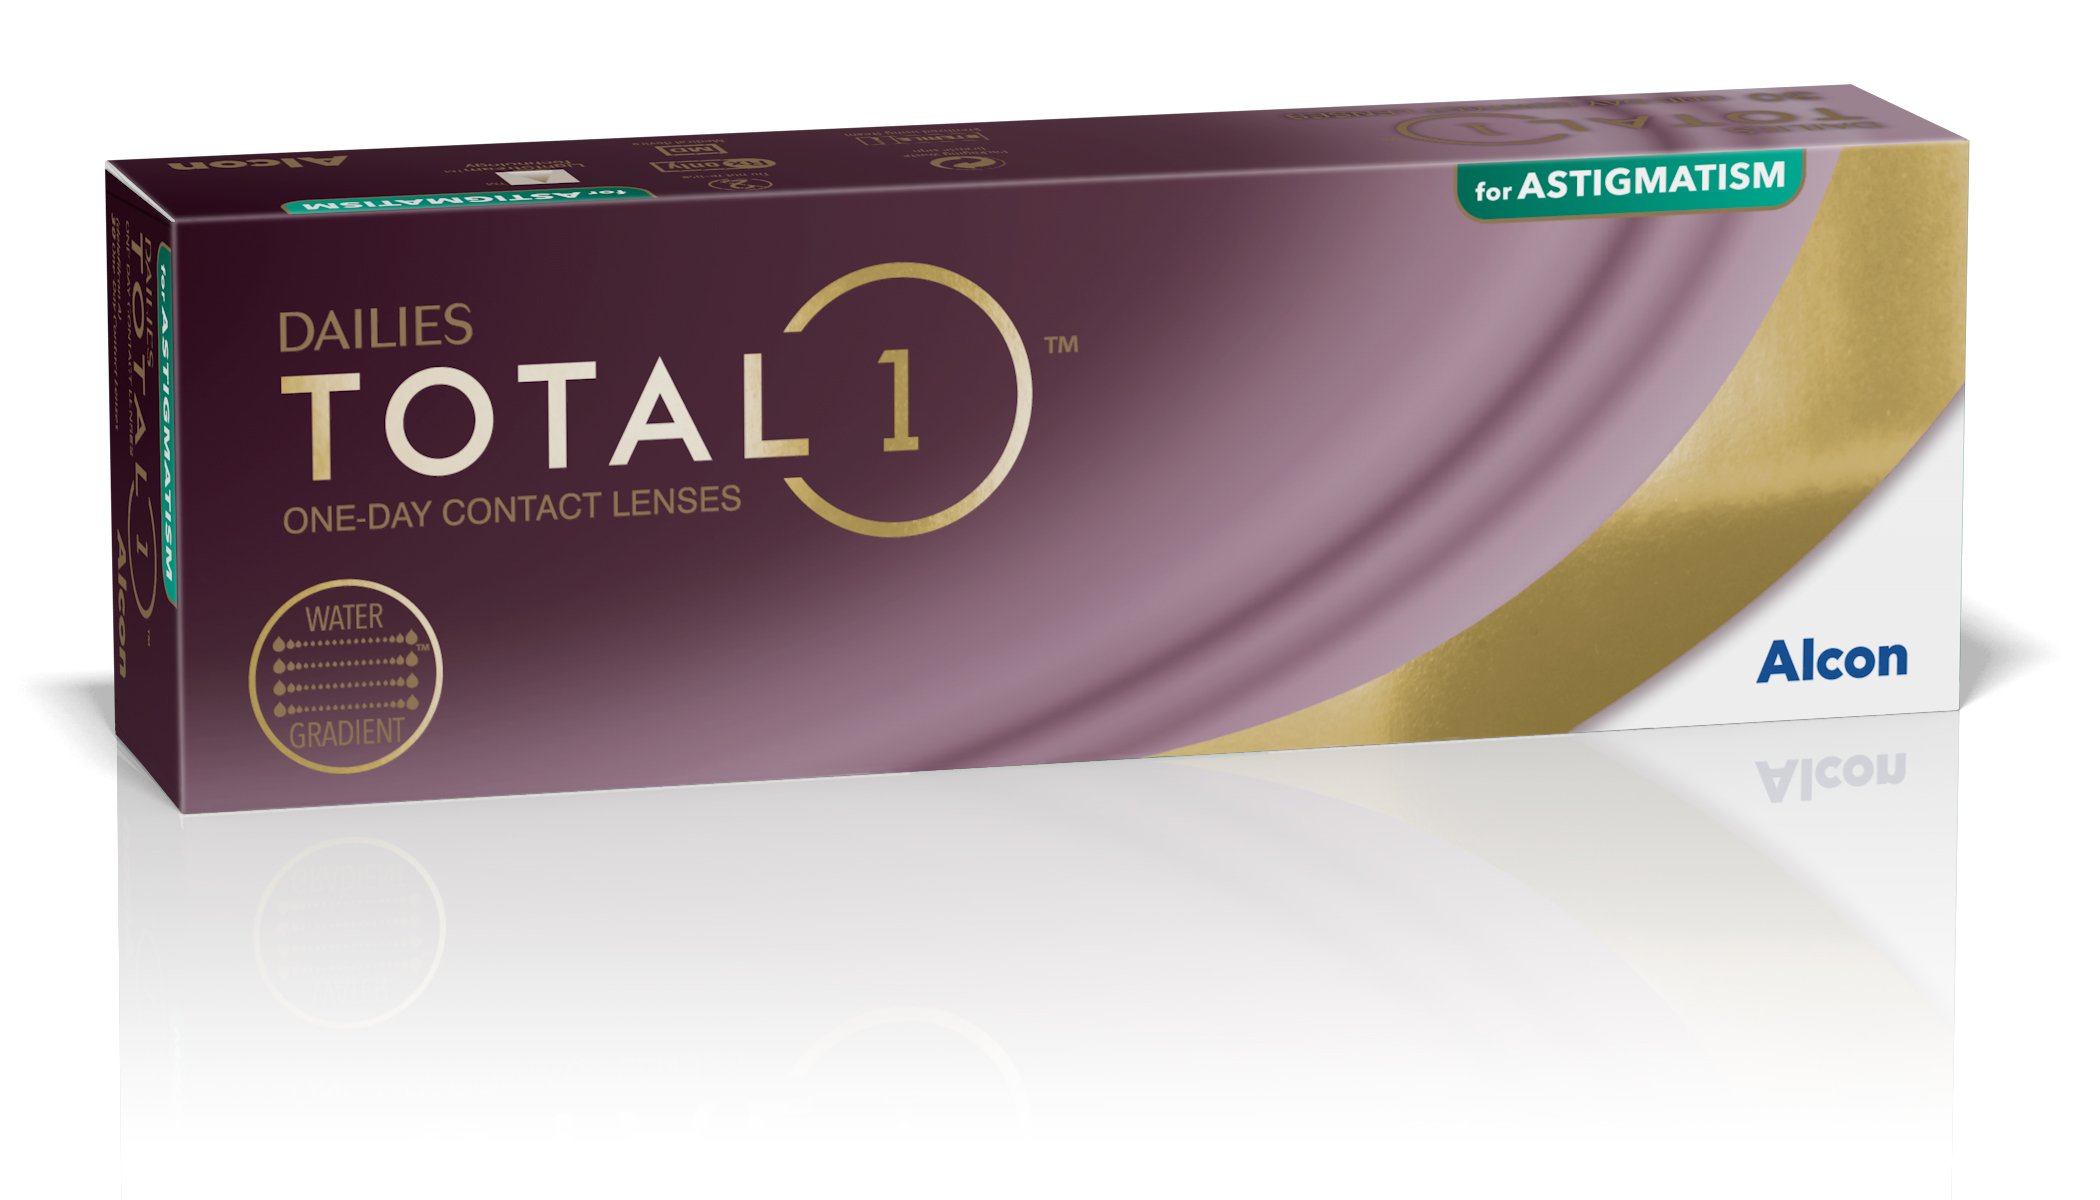 Dailies Total 1 for Astigmatism, Alcon (30 Stk.)